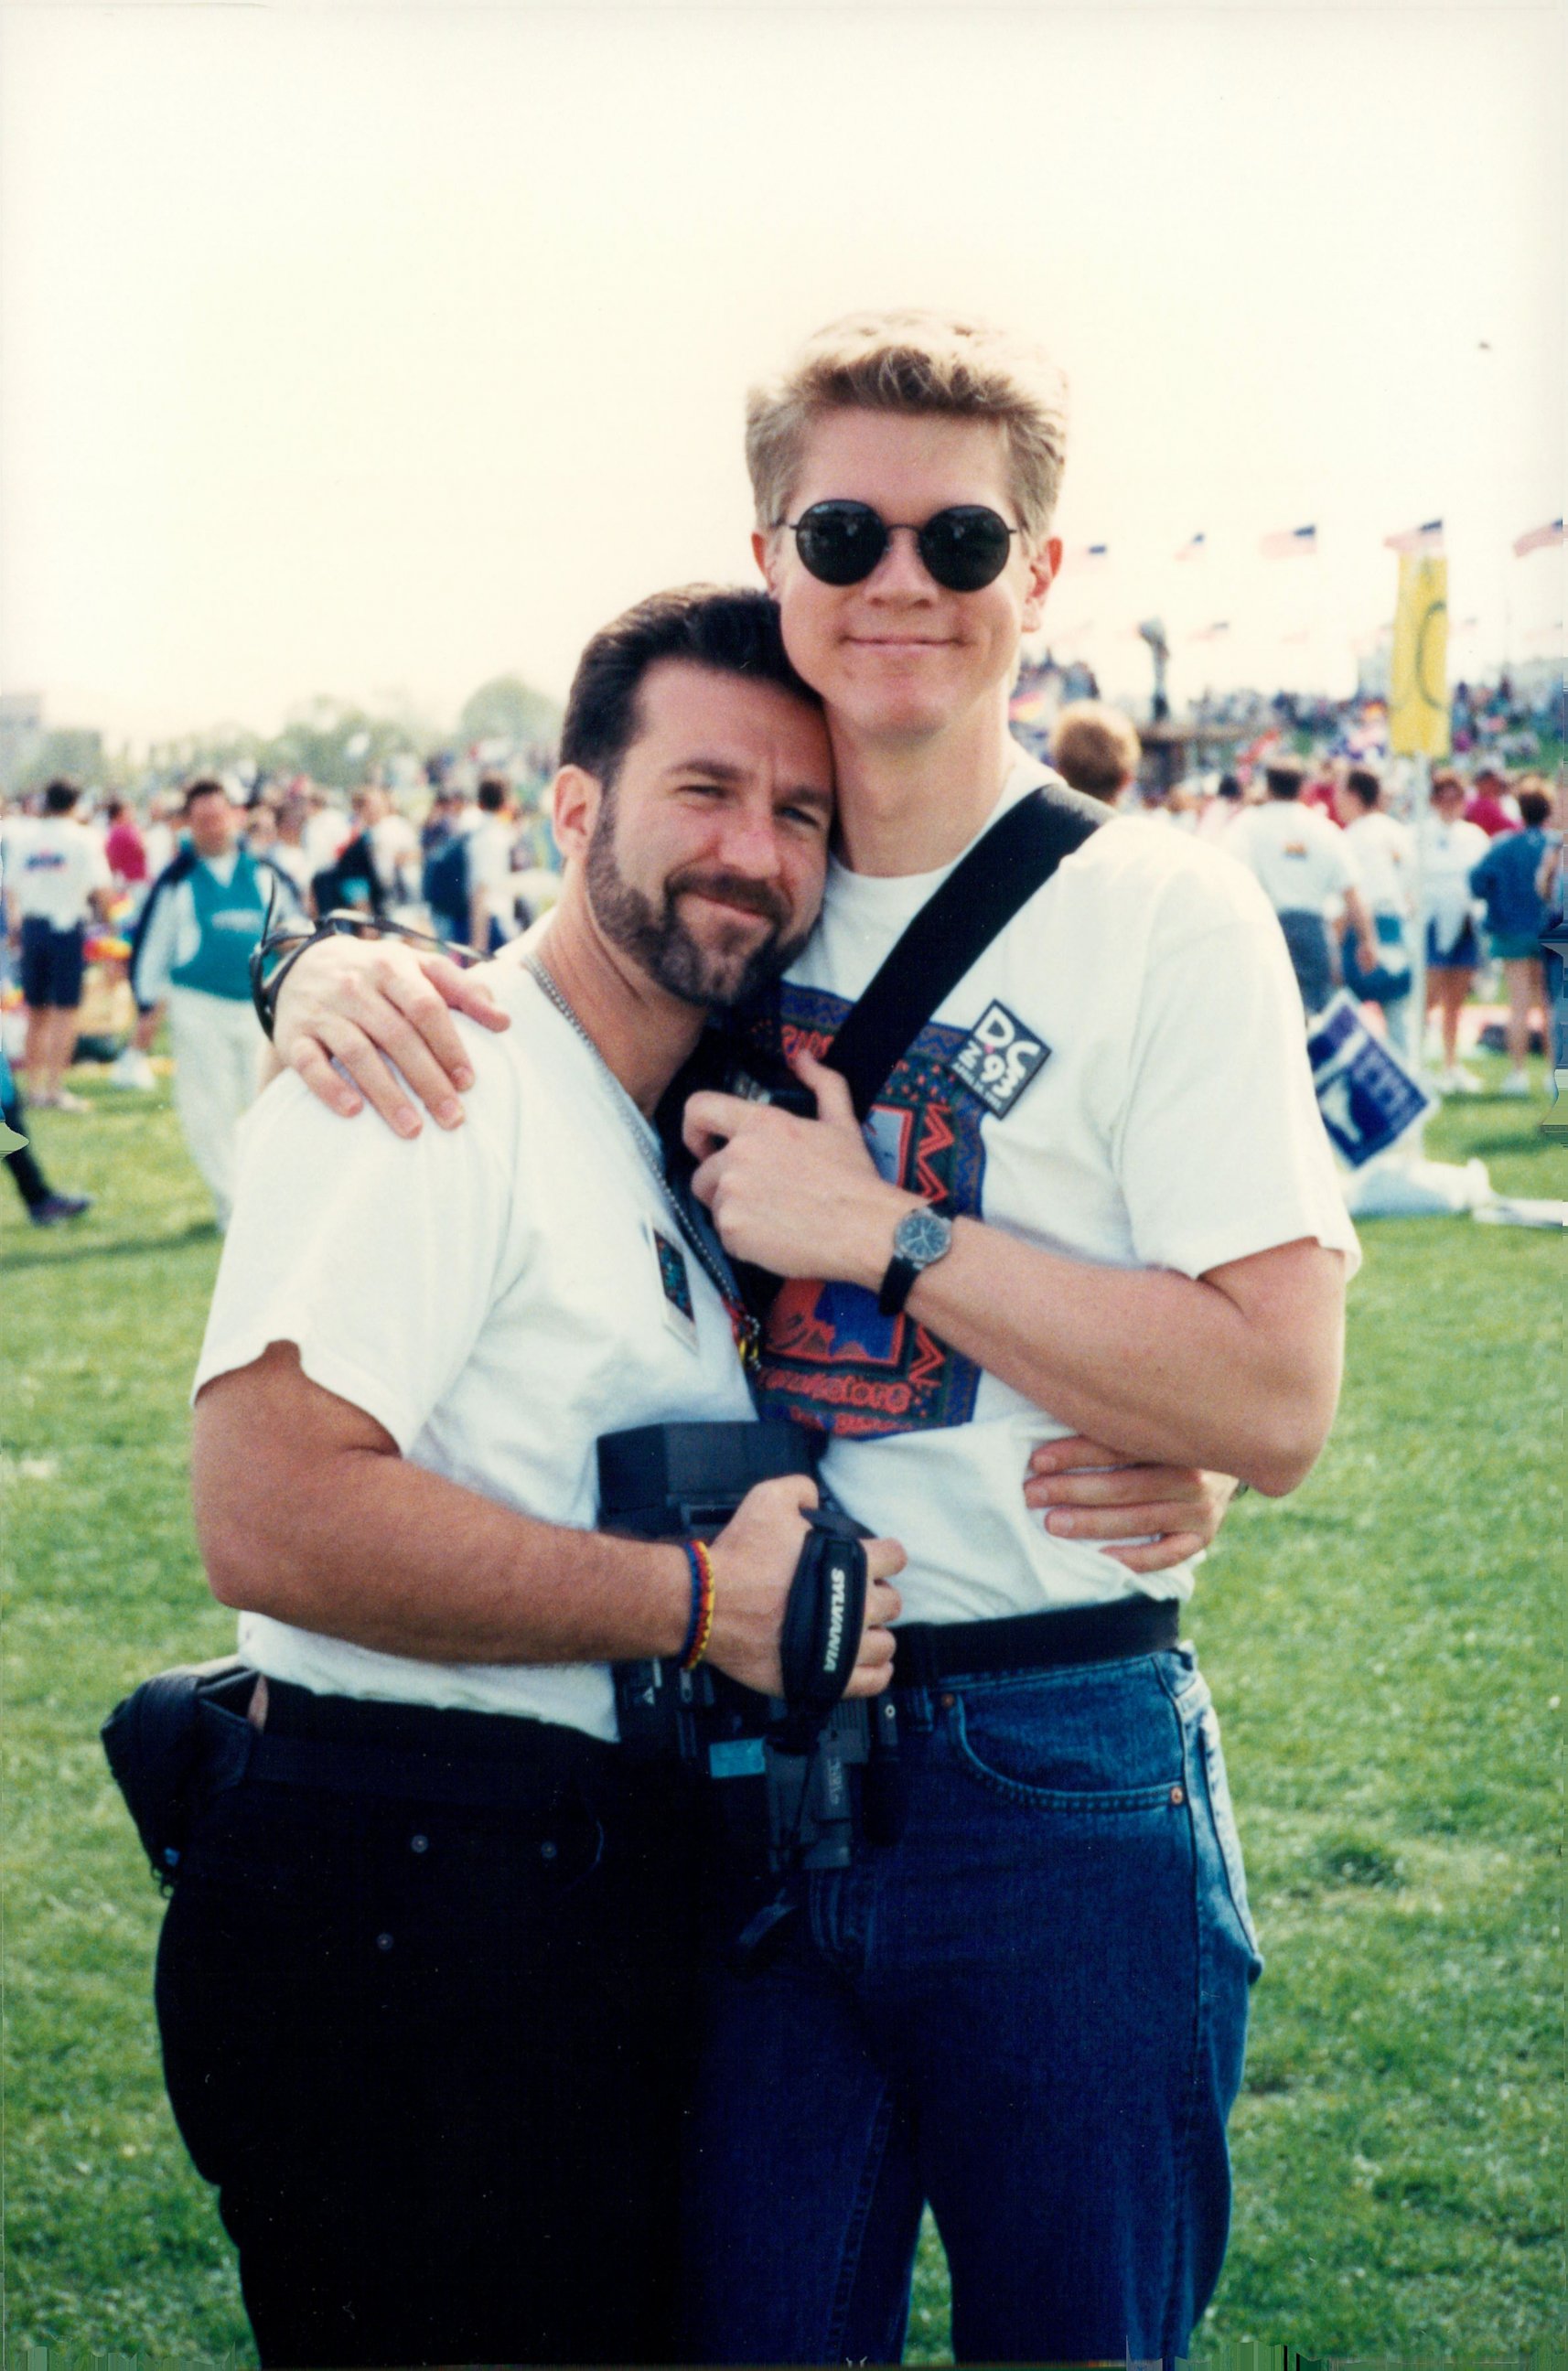 PHOTO: Nicholas Cardello and Kurt English at the1993 March on Washington for Lesbian, Gay, and Bi Equal Rights and Liberation in Washington, D.C.